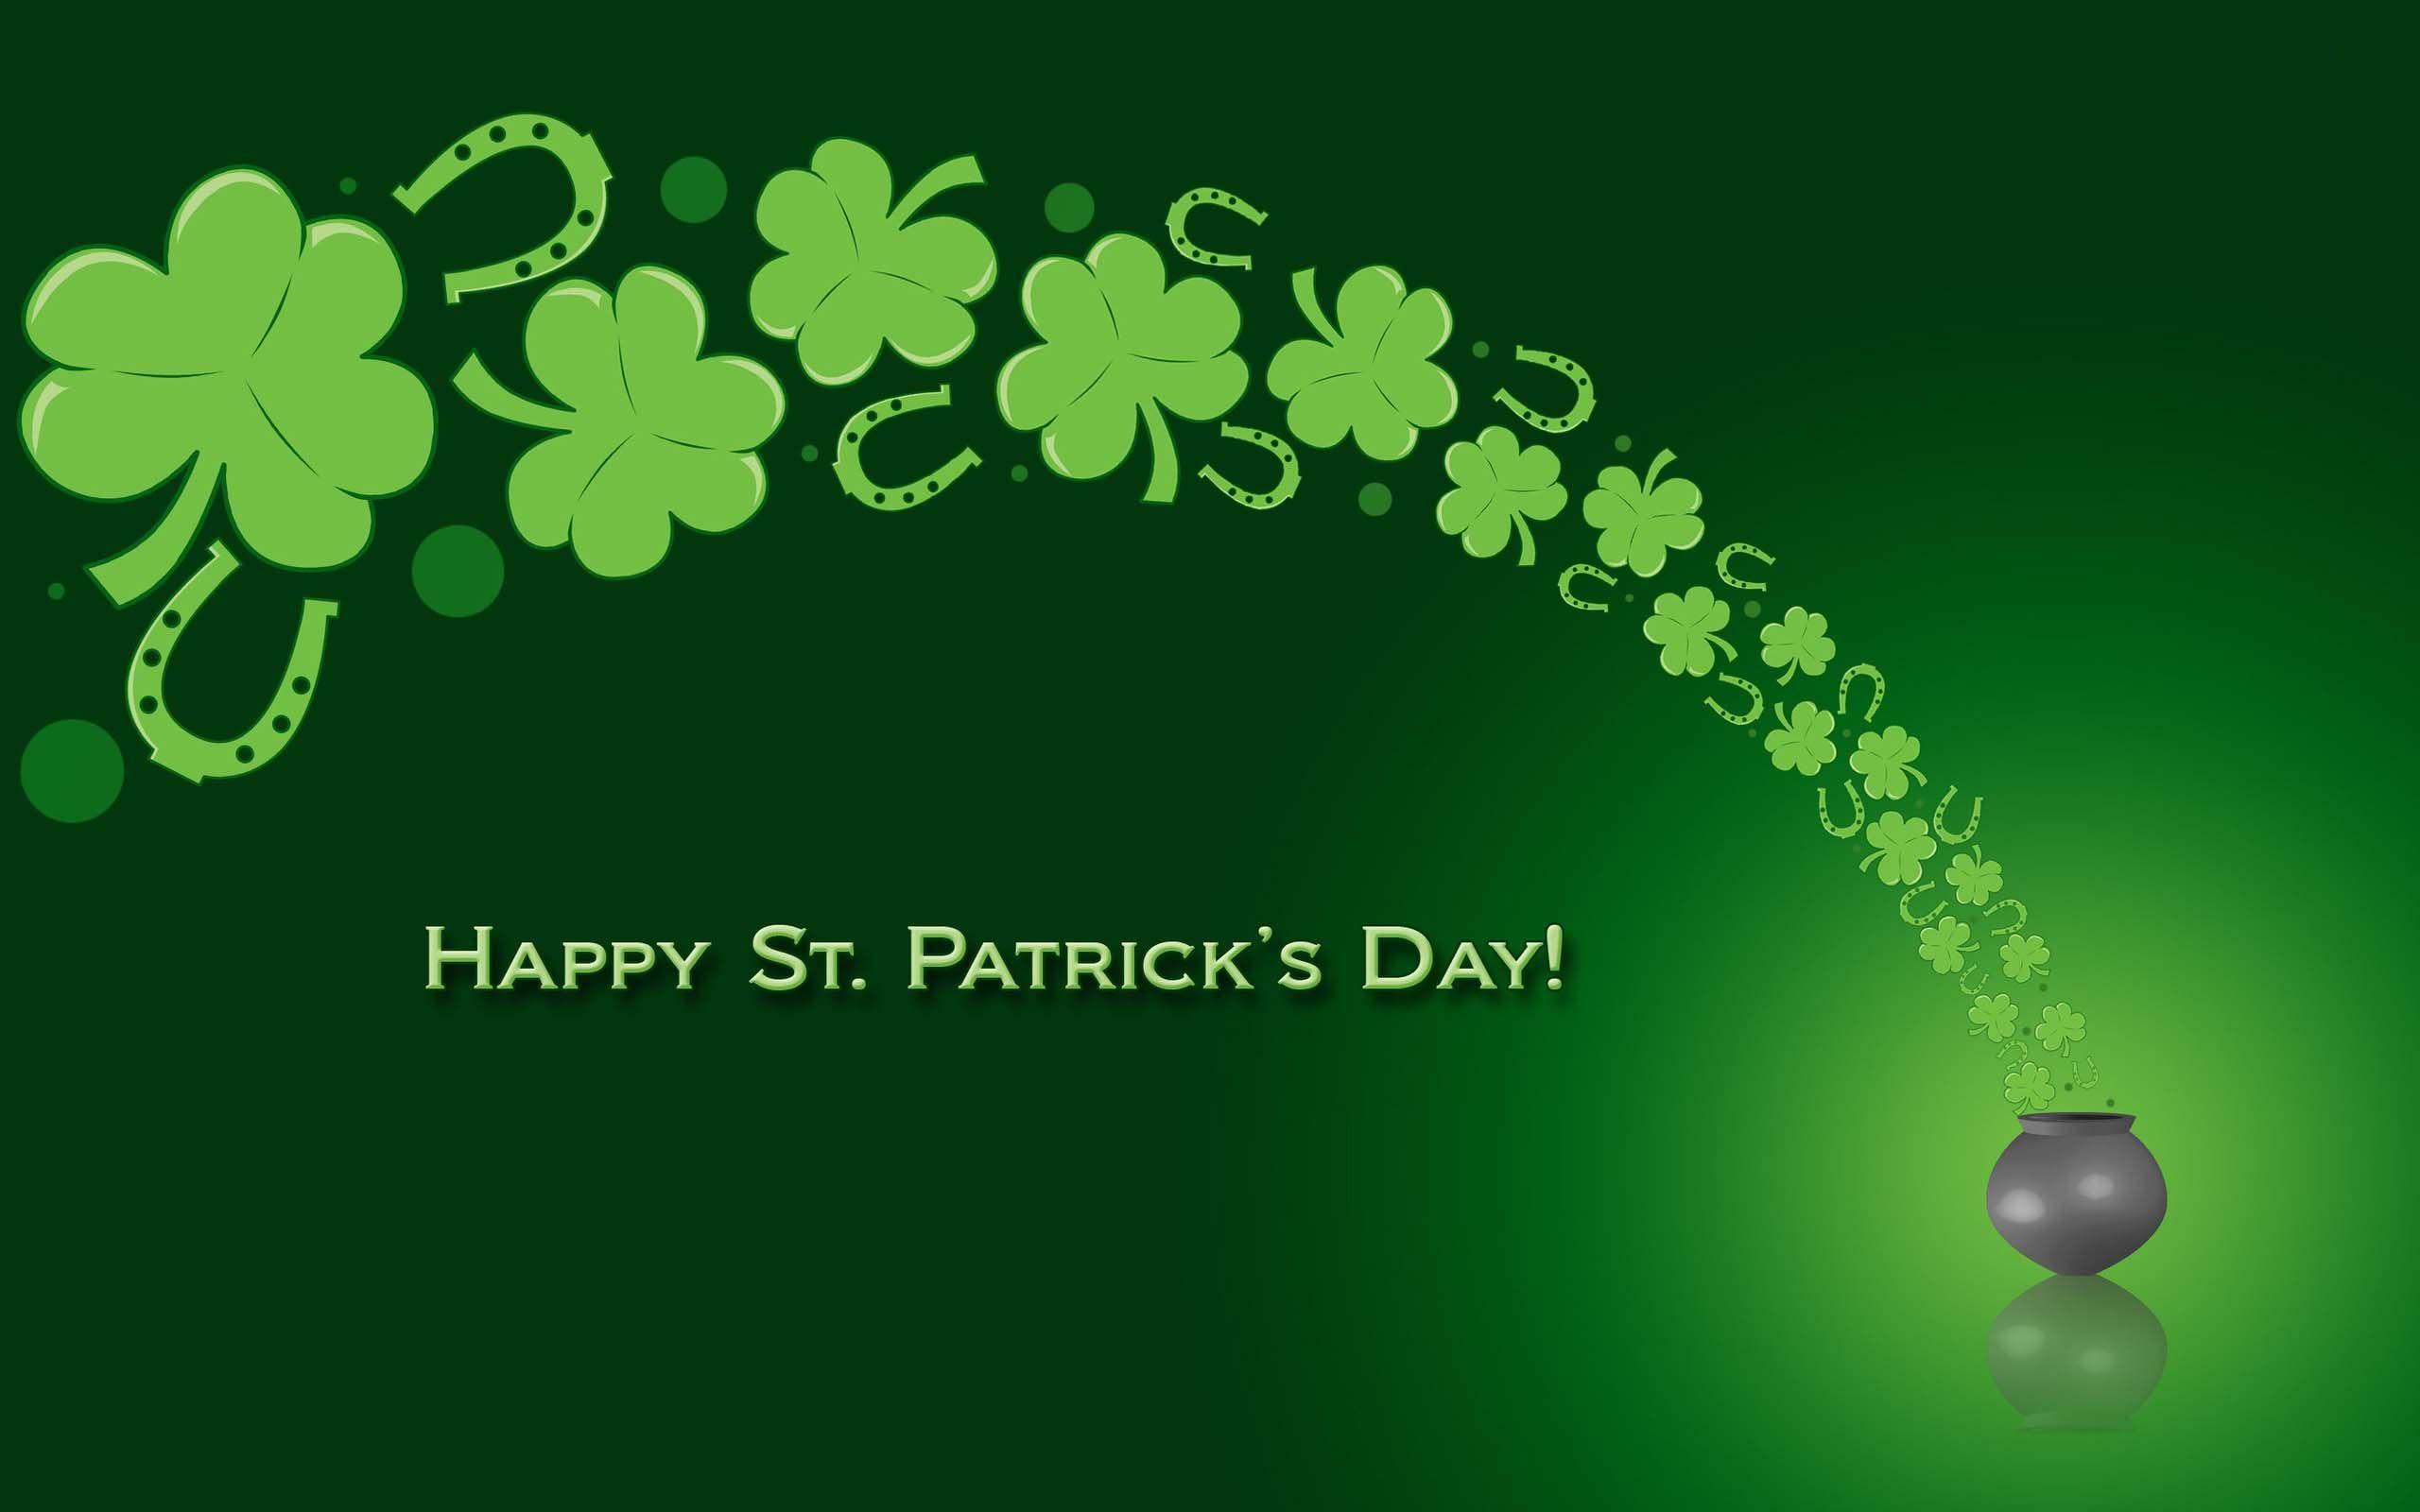 Happy St. Patrick's Day from CUE, Inc!, Inc